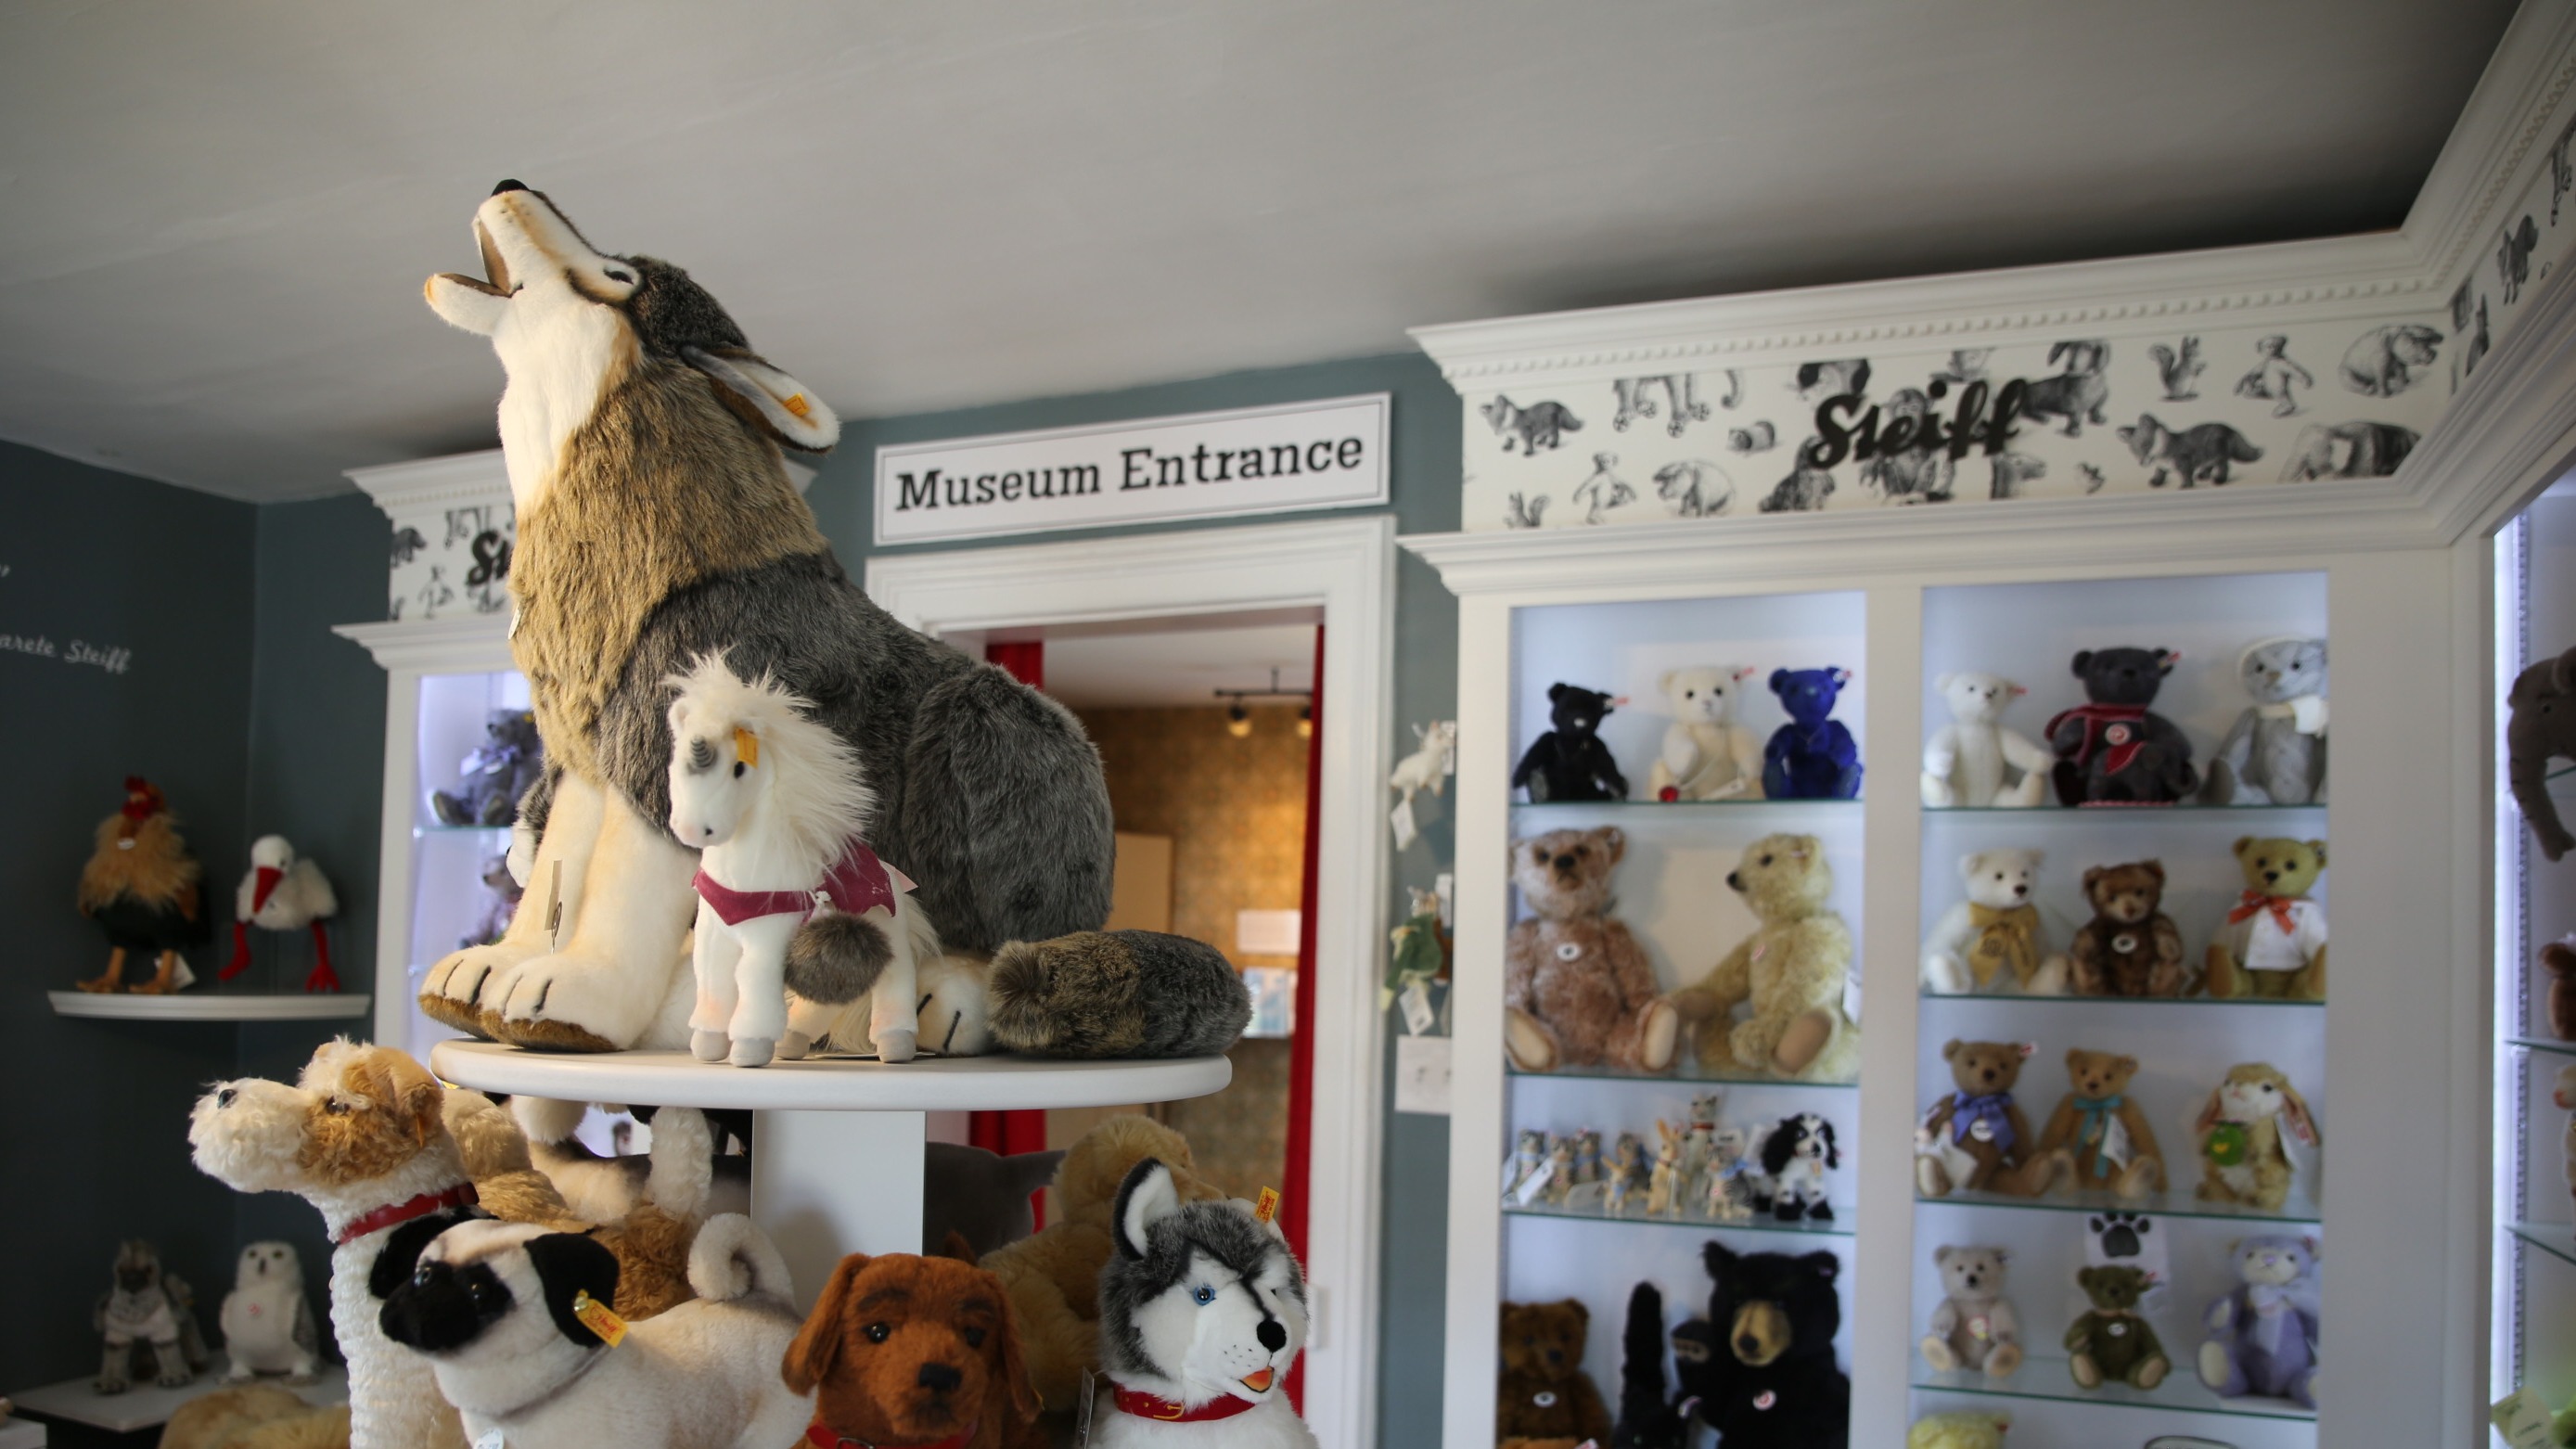 There is something for everyone in the Teddy Bear Museum and the Steiff Gift Shop